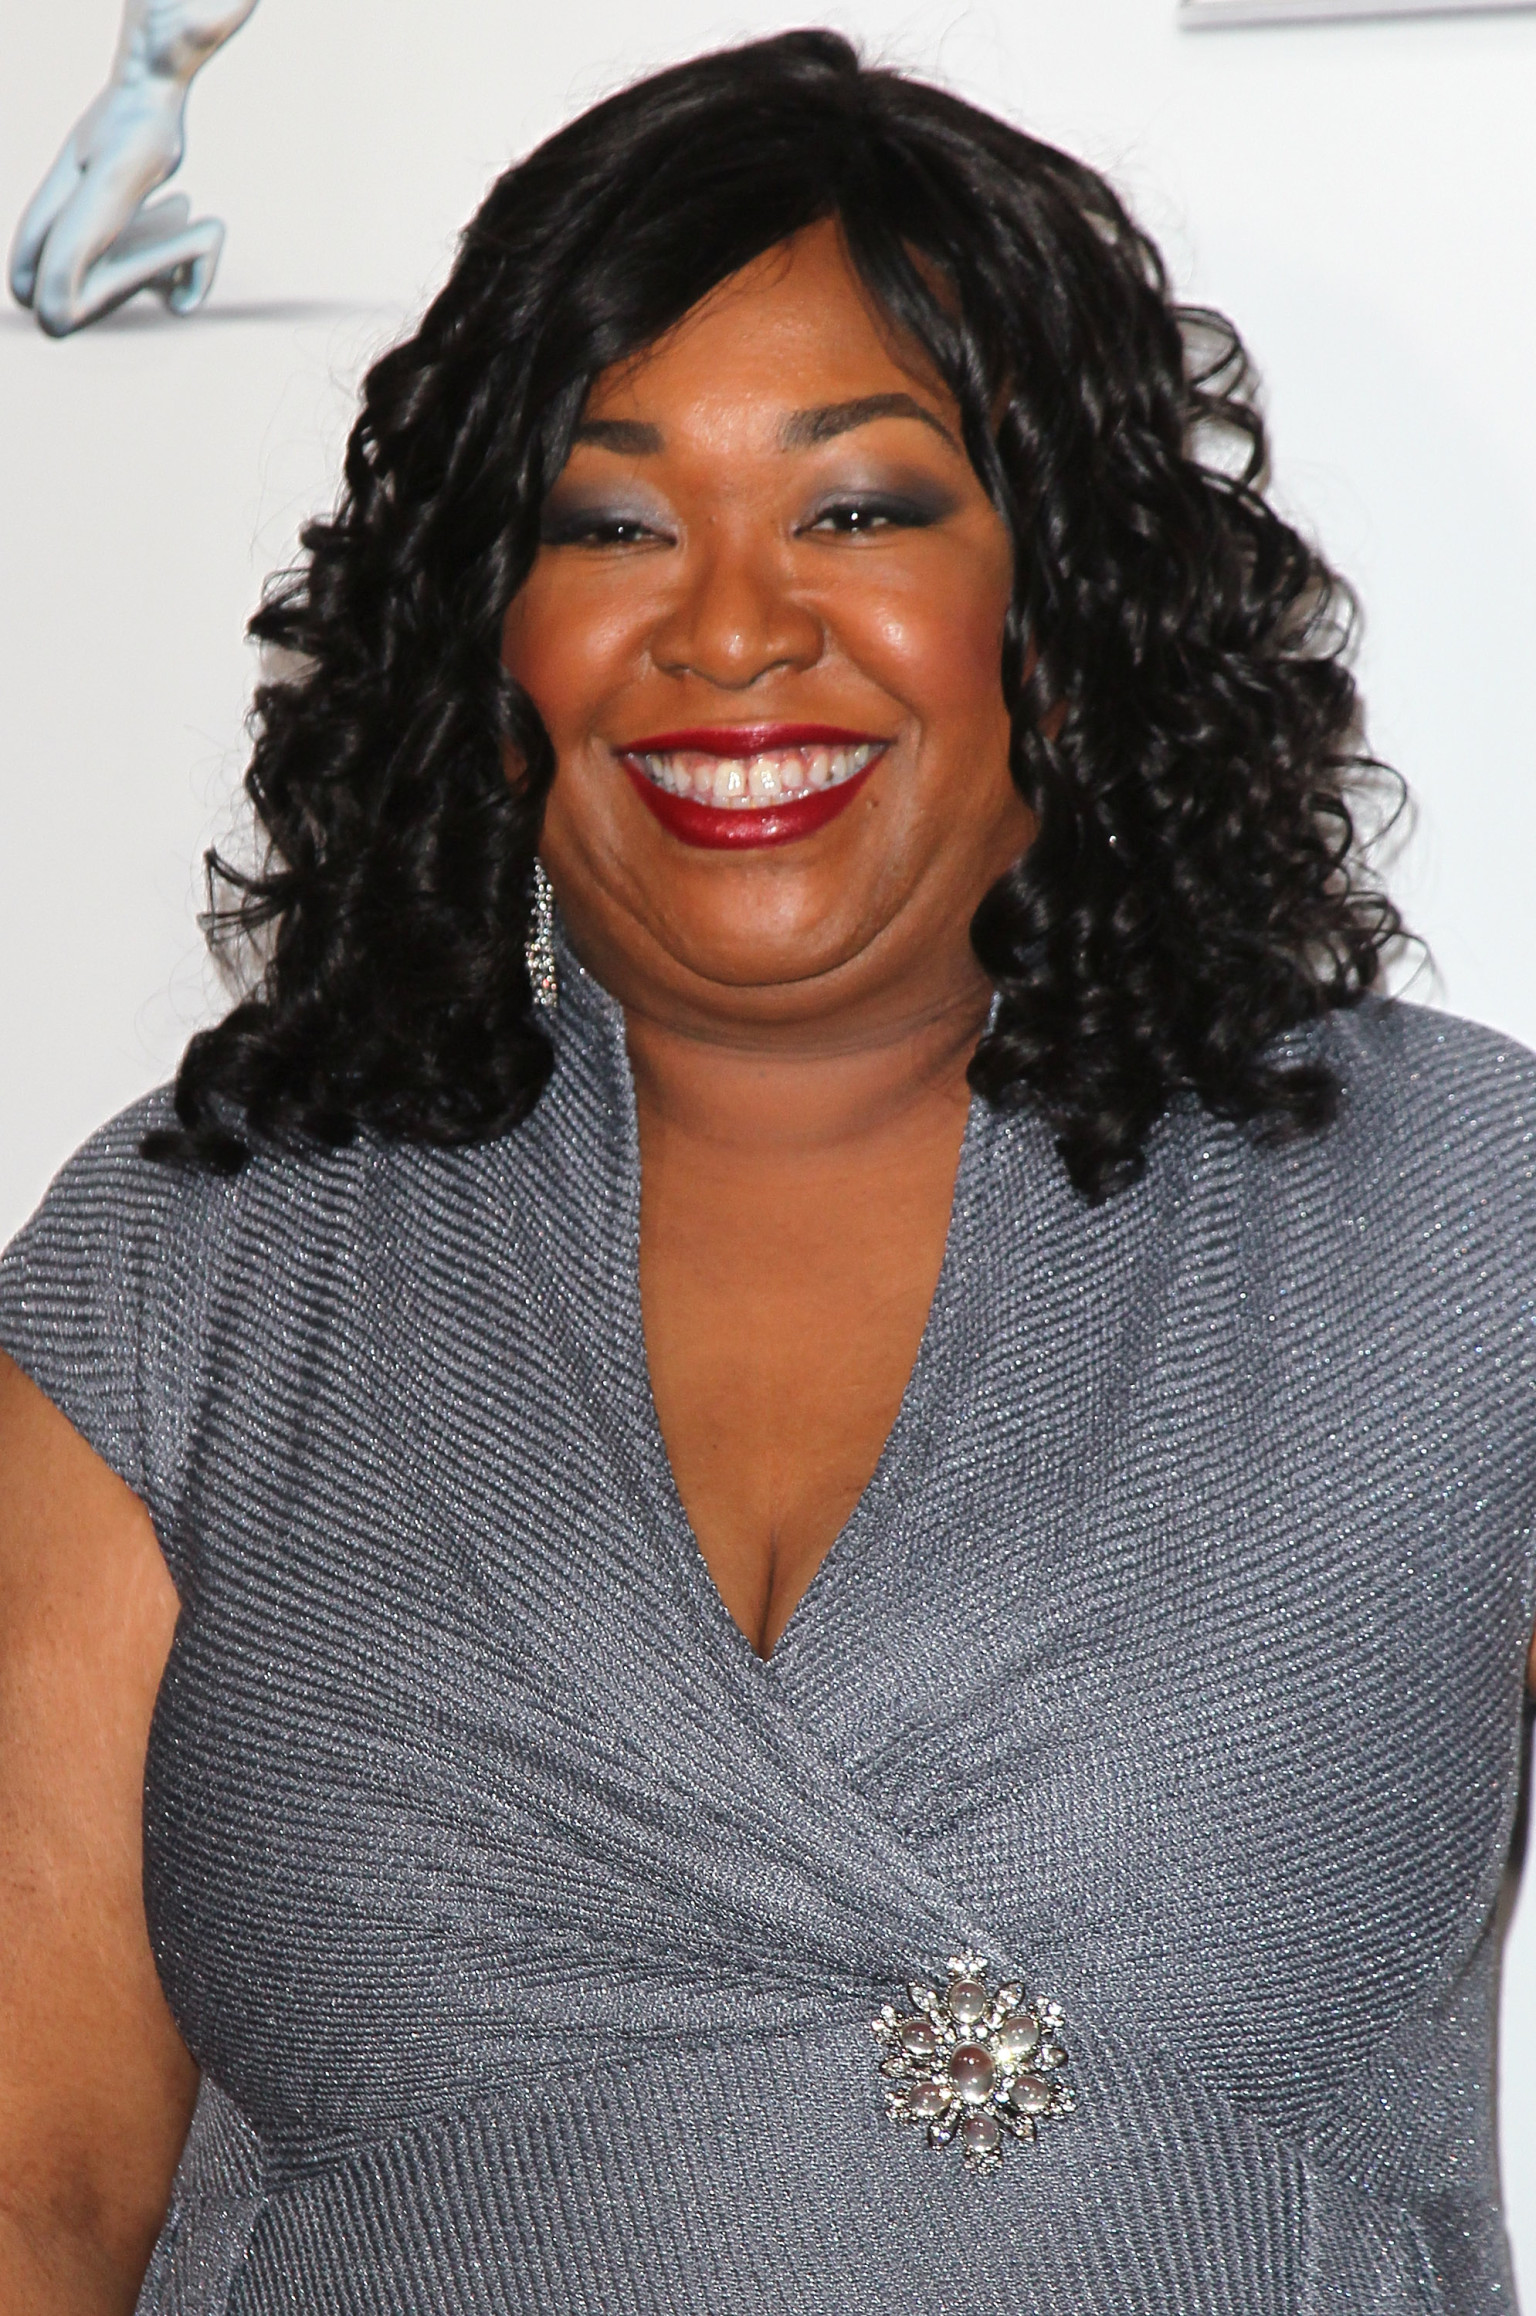 Shonda Rhimes Sells Comedy Pilot To ABC; Would Be Her Third Show With ...